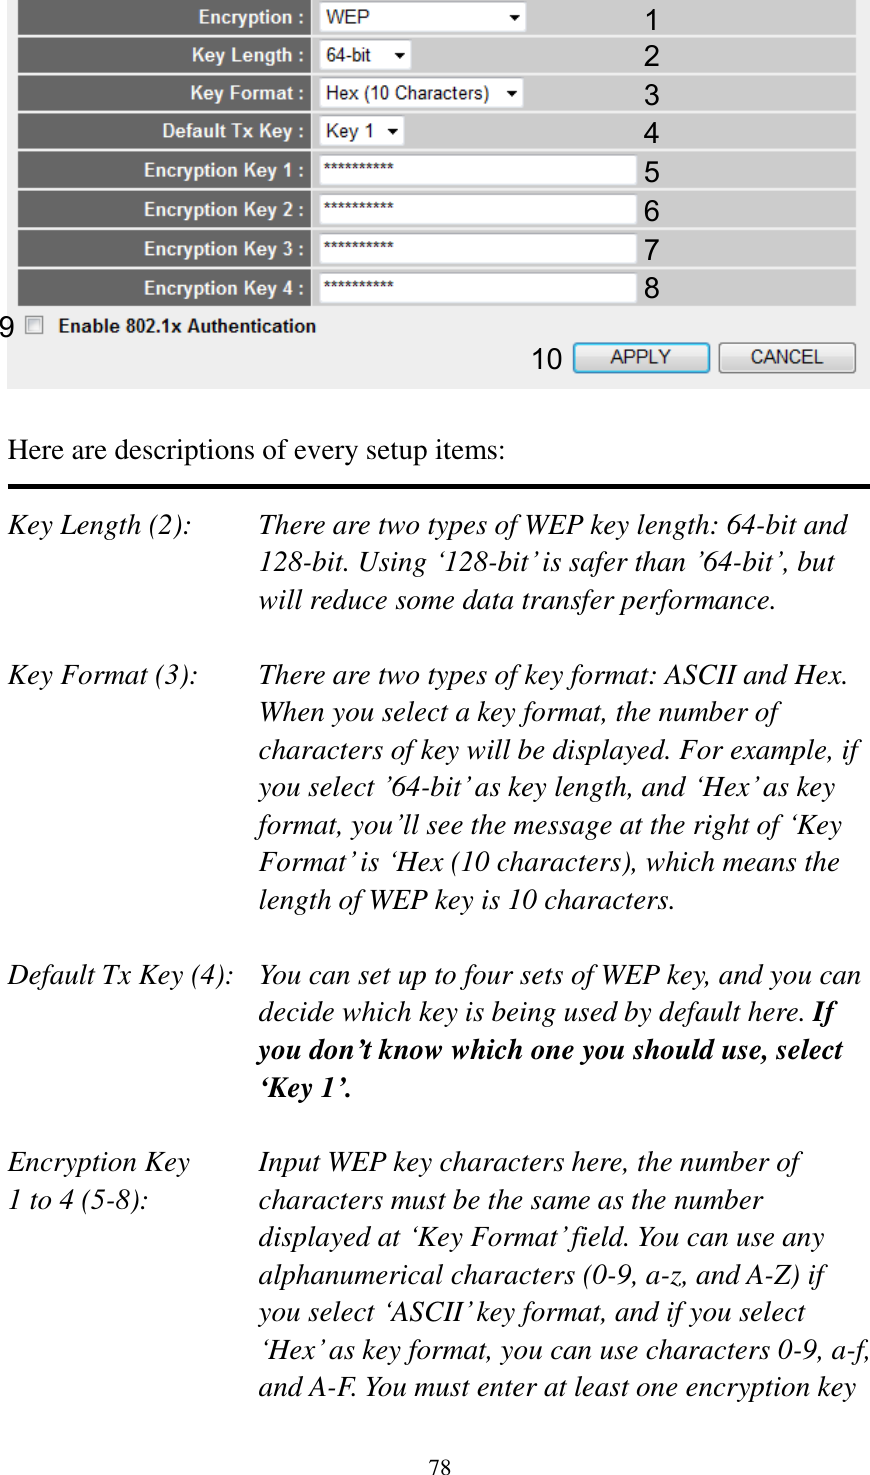 78   Here are descriptions of every setup items:  Key Length (2):    There are two types of WEP key length: 64-bit and 128-bit. Using „128-bit‟ is safer than ‟64-bit‟, but will reduce some data transfer performance.  Key Format (3):    There are two types of key format: ASCII and Hex. When you select a key format, the number of characters of key will be displayed. For example, if you select ‟64-bit‟ as key length, and „Hex‟ as key format, you‟ll see the message at the right of „Key Format‟ is „Hex (10 characters), which means the length of WEP key is 10 characters.  Default Tx Key (4):   You can set up to four sets of WEP key, and you can decide which key is being used by default here. If you don’t know which one you should use, select ‘Key 1’.  Encryption Key     Input WEP key characters here, the number of 1 to 4 (5-8):    characters must be the same as the number displayed at „Key Format‟ field. You can use any alphanumerical characters (0-9, a-z, and A-Z) if you select „ASCII‟ key format, and if you select „Hex‟ as key format, you can use characters 0-9, a-f, and A-F. You must enter at least one encryption key 1 2 3 5 7 6 9 4 8 10 